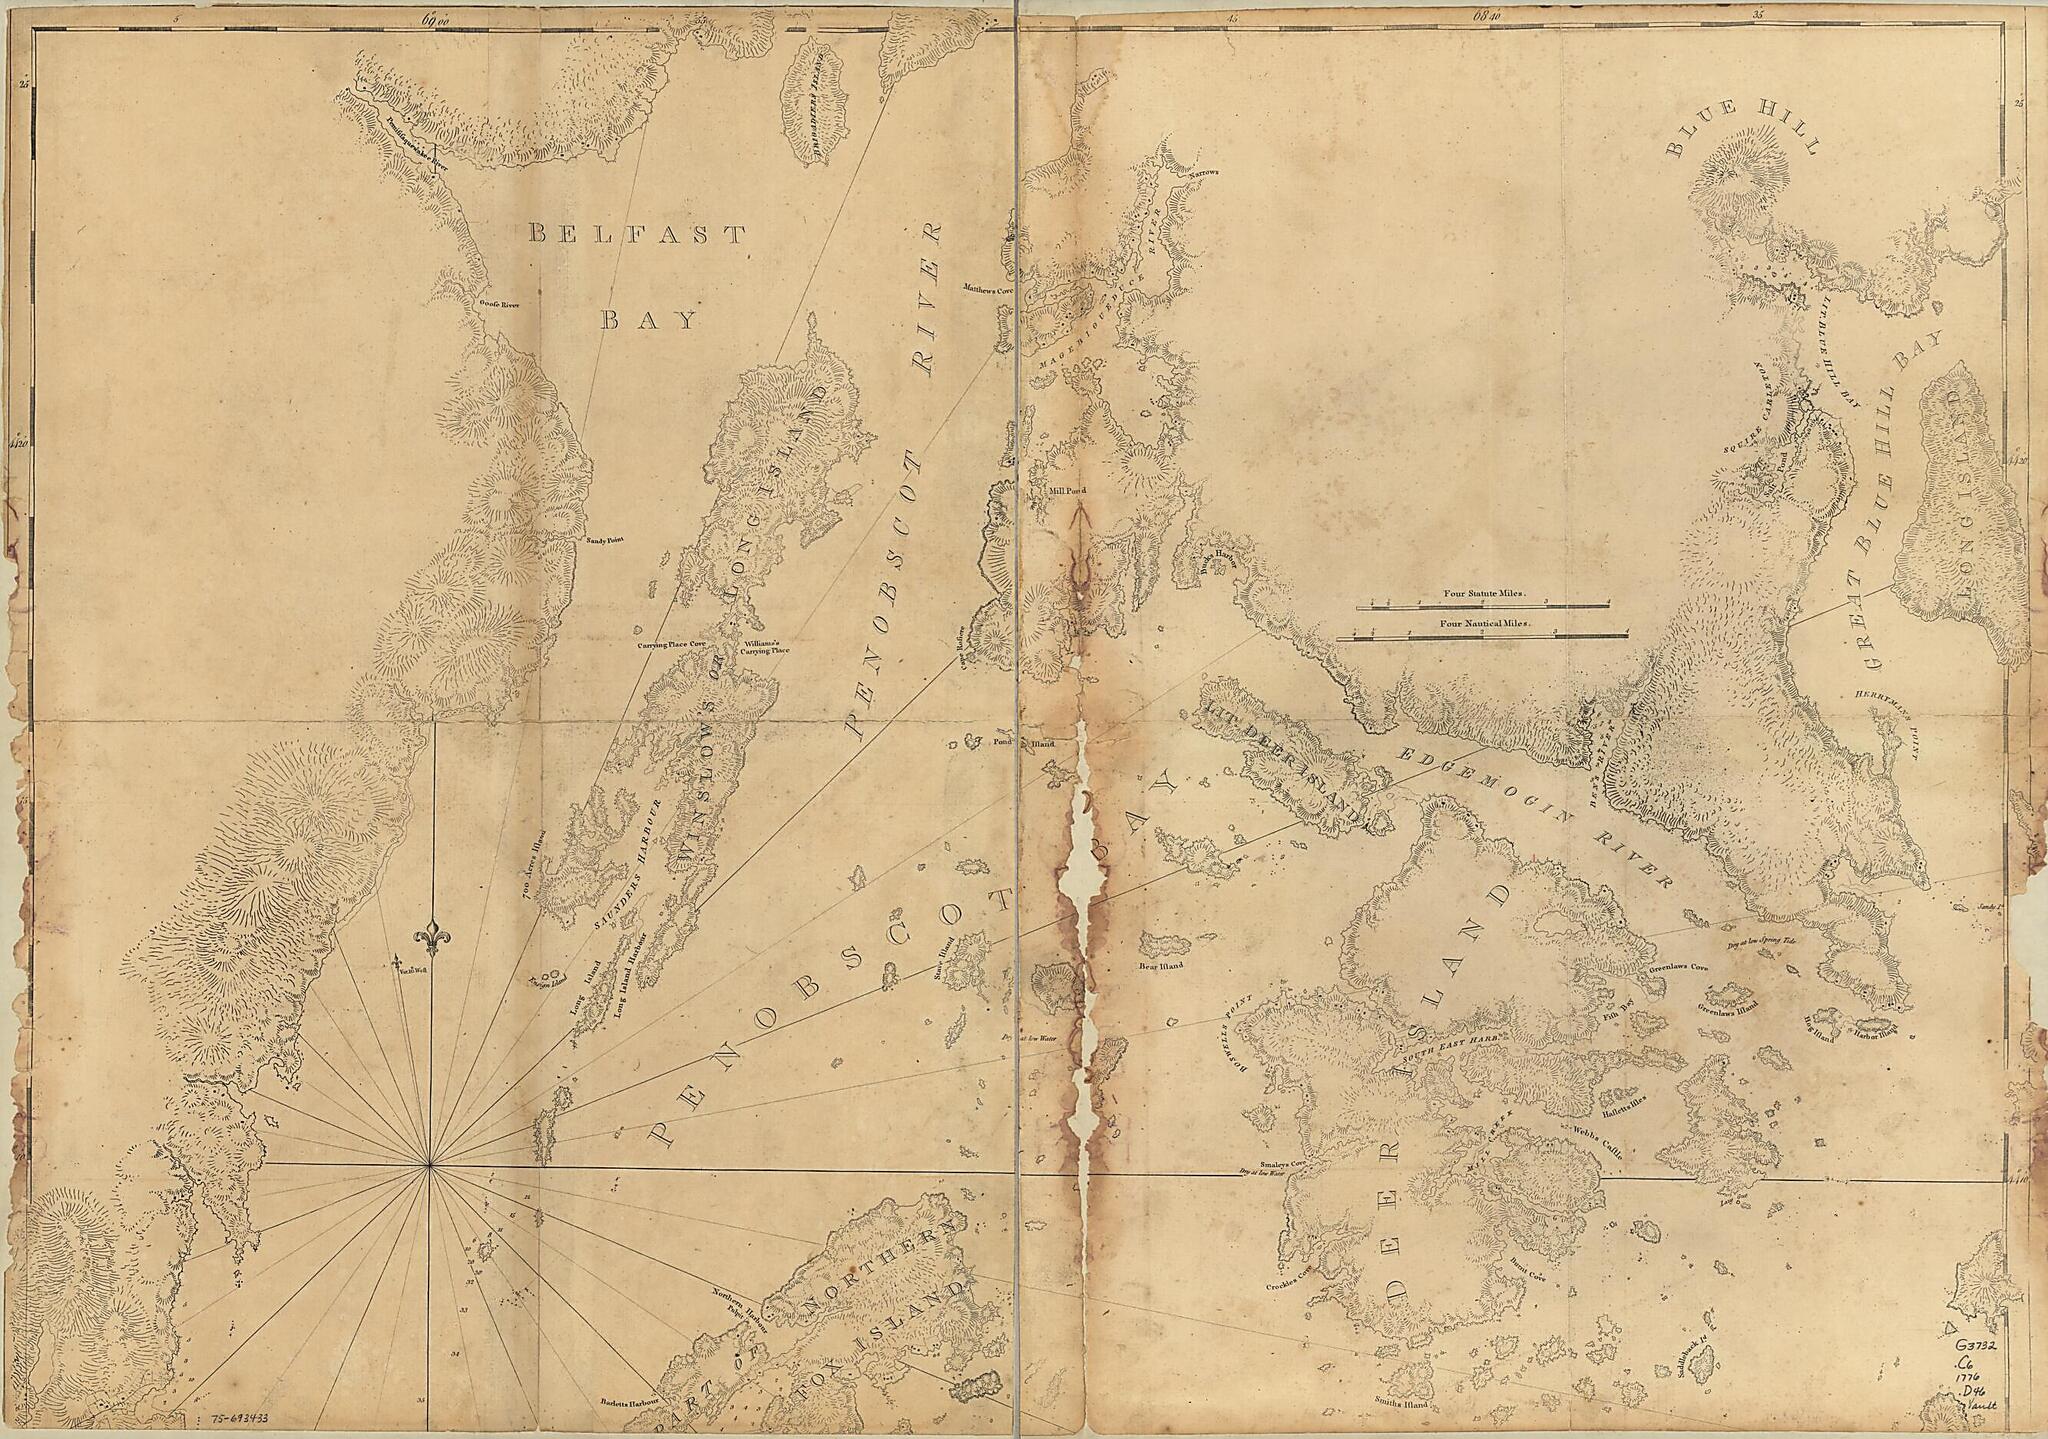 This old map of Coast of Maine Showing Blue Hill Bay, Penobscot Bay, Belfast Bay, Islesboro Island, Deer Island, and Other Islands from 1776 was created by Joseph F. W. (Joseph Frederick Wallet) Des Barres in 1776